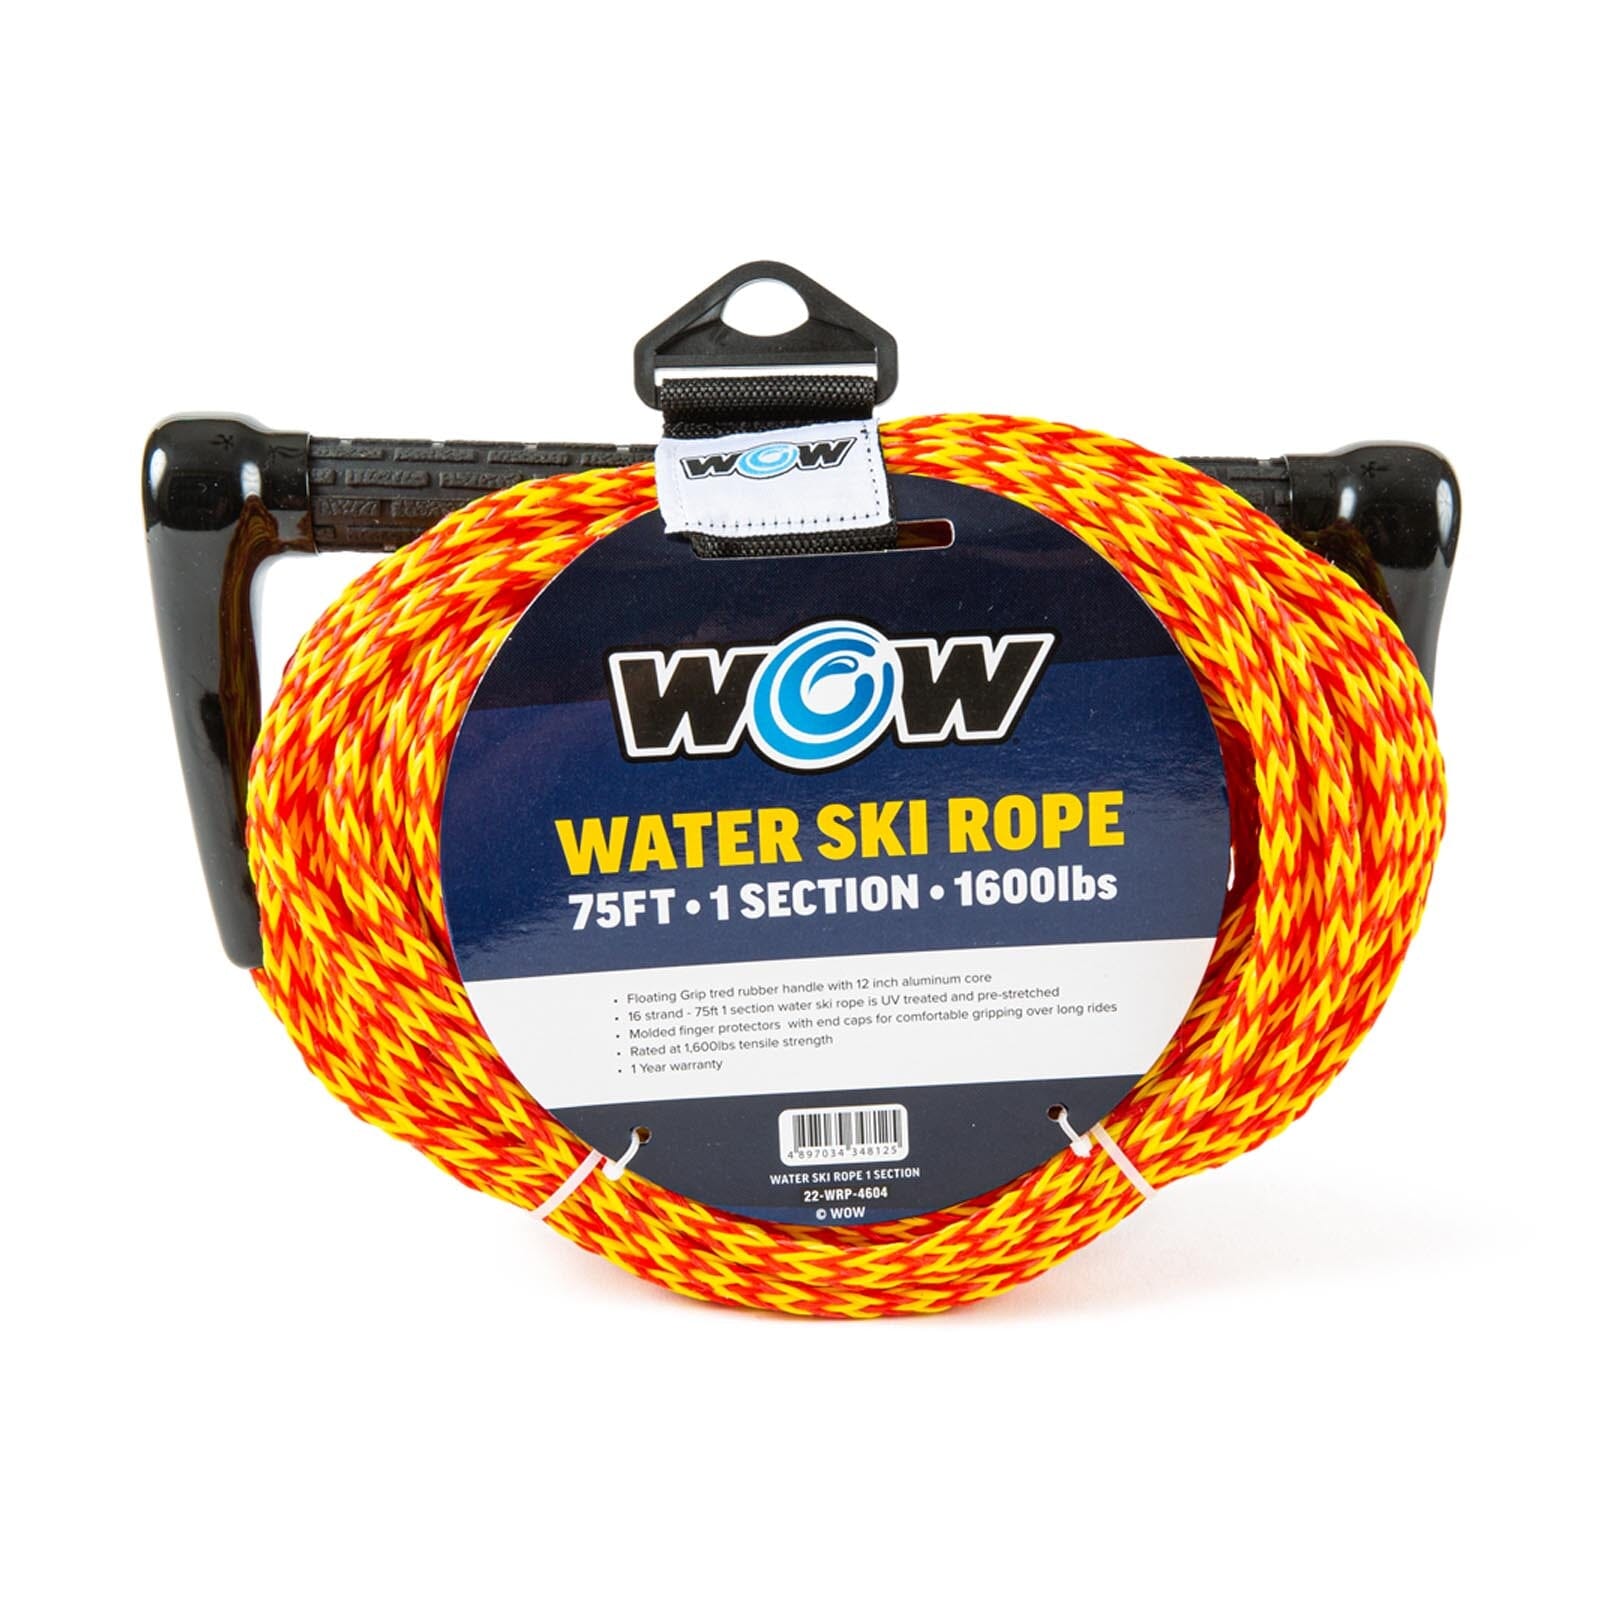 Wow Sports Towing Rope for Wakeboard, Water Ski and Wakesurf, 75